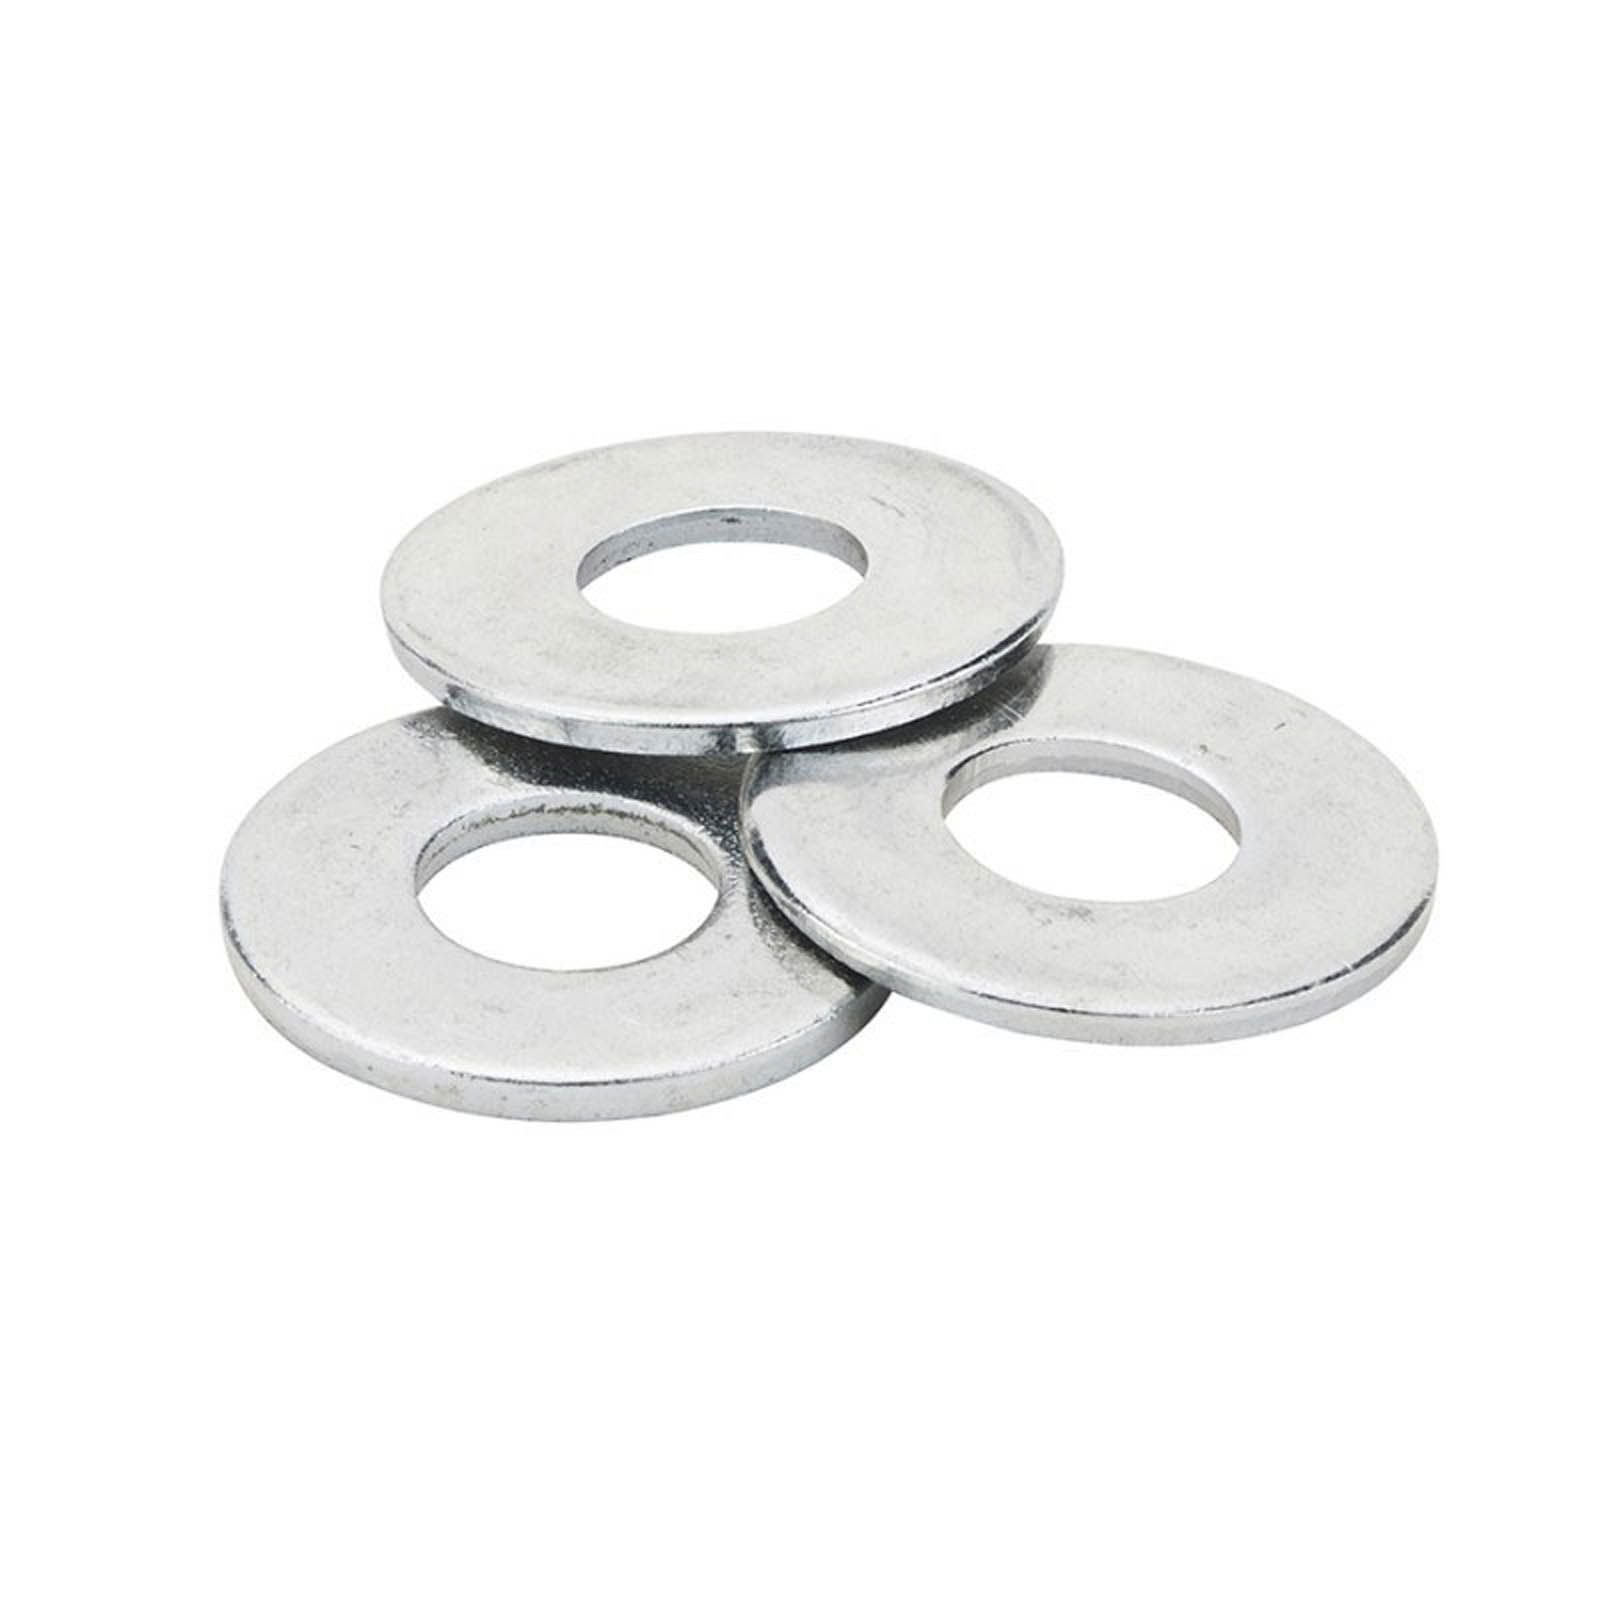 New WHITES Washer Flat Zinc Plated - 8mm (50 Pack) #HWW8